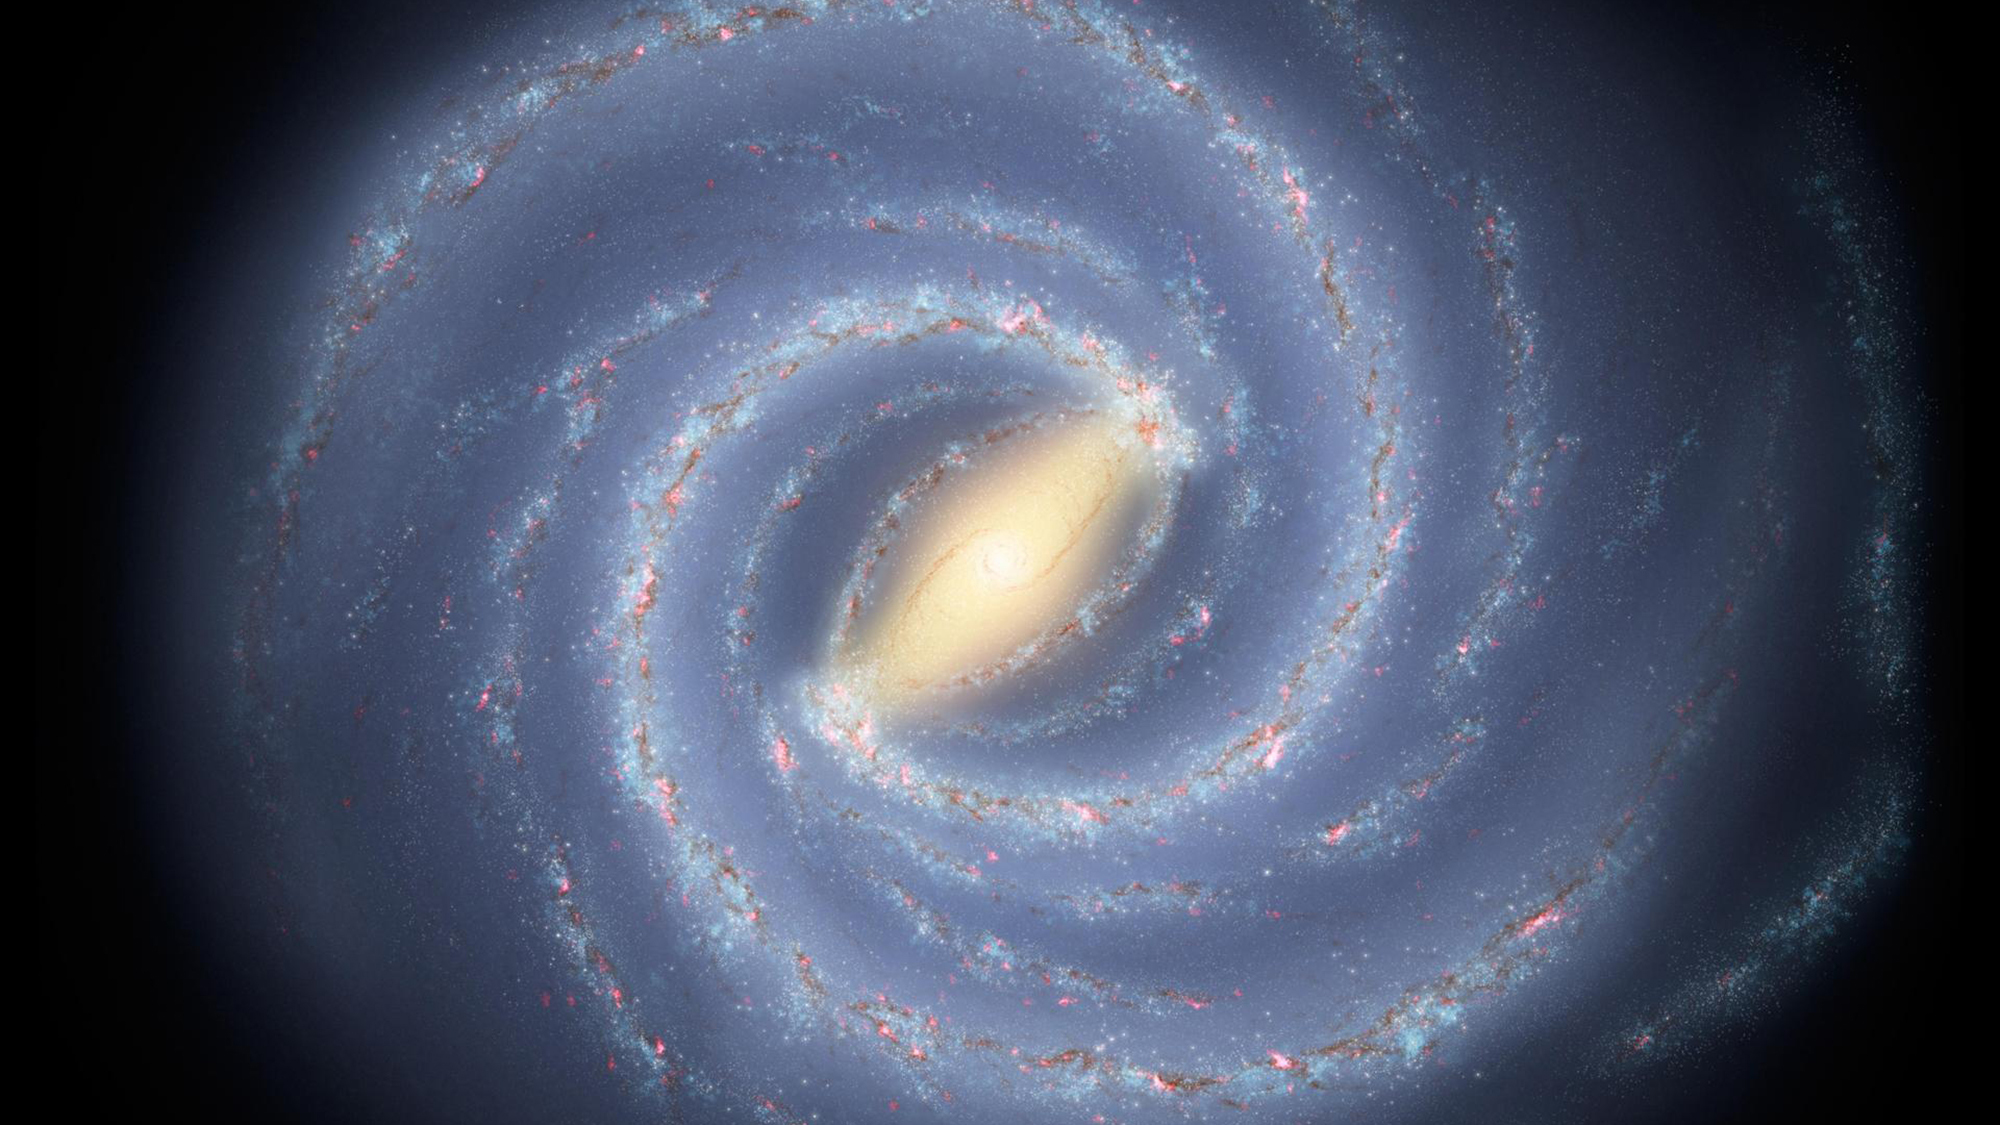 An artist’s concept of the Milky Way, which is a spiral galaxy that has a defined center. The spiral arms are made up of stars that can be wound tightly or loosely.